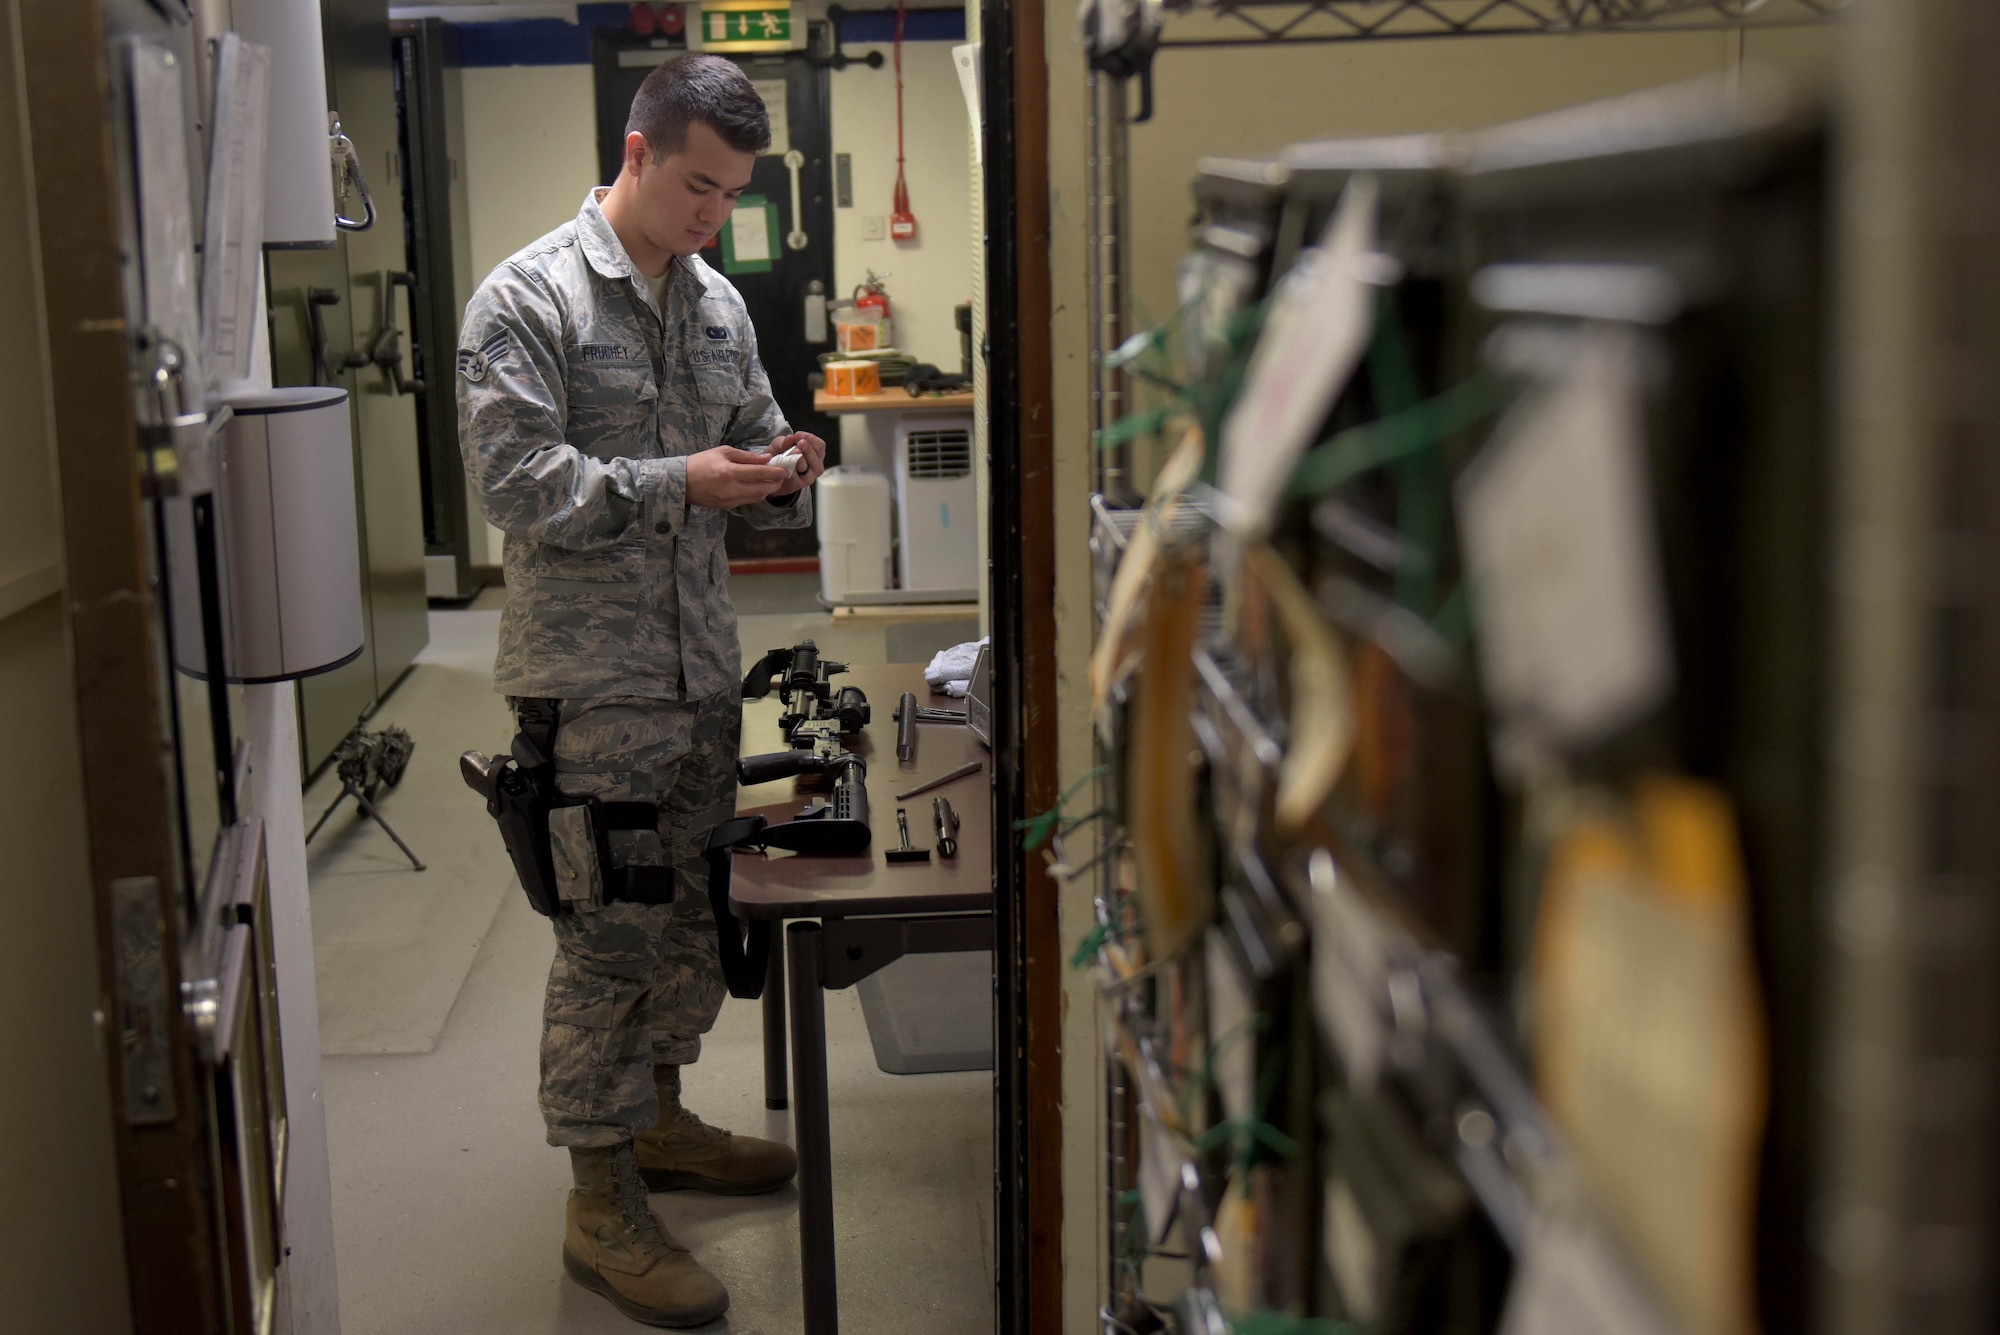 U.S. Air Force Senior Airman William Fruchey, 100th Security Forces Squadron armorer, cleans an M-4 carbine in the armory at RAF Mildenhall, England, May 2, 2019. All weapons are cleaned after each use. (U.S. Air Force photo by Senior Airman Benjamin Cooper)